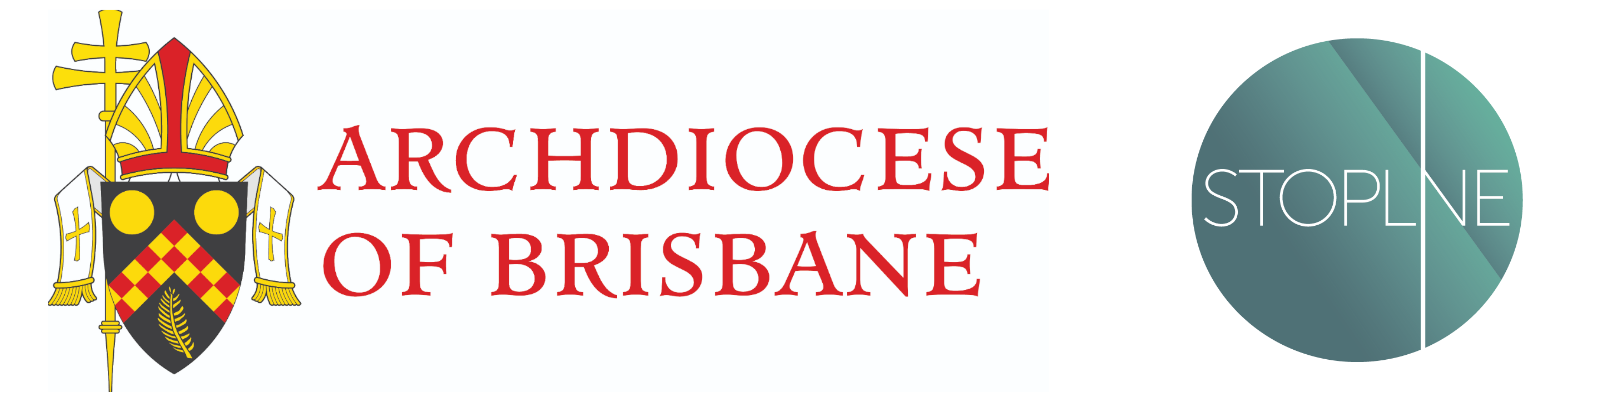 The Archdiocese of Brisbane Online Reporting